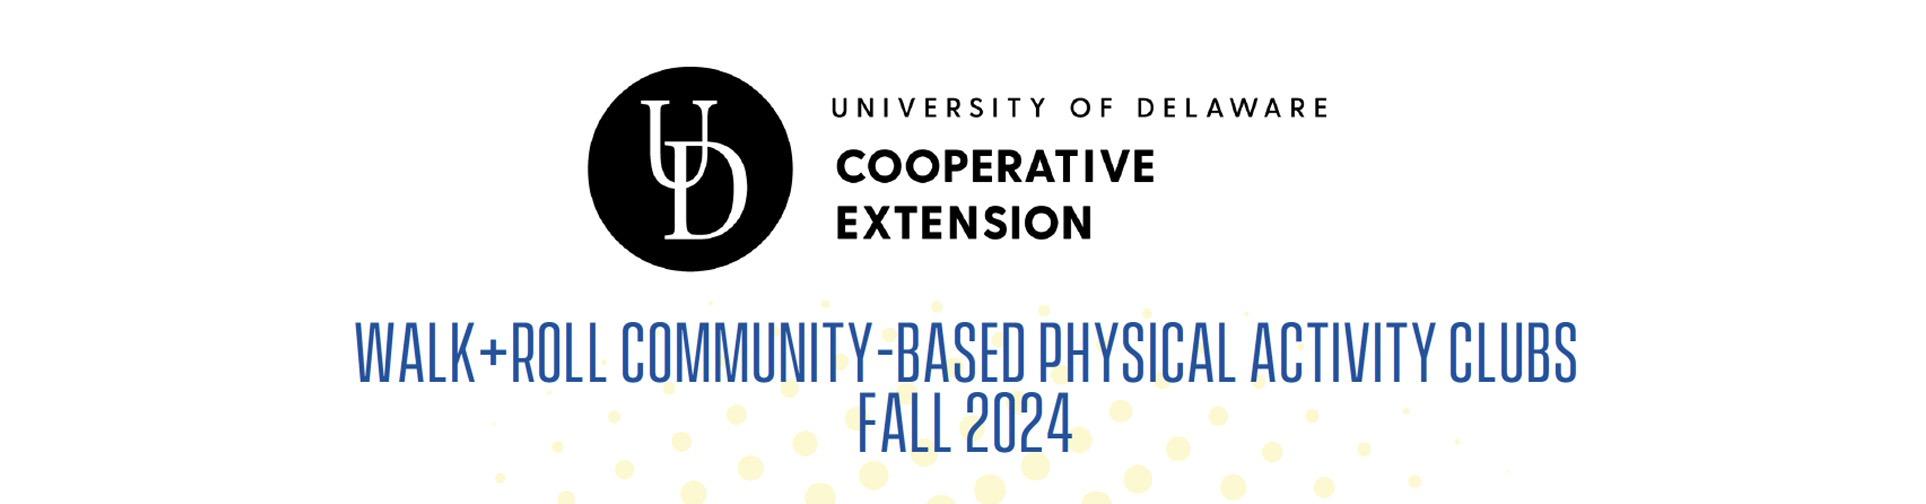 Walk+Roll Community-Based Physical Activity Clubs Fall 2024